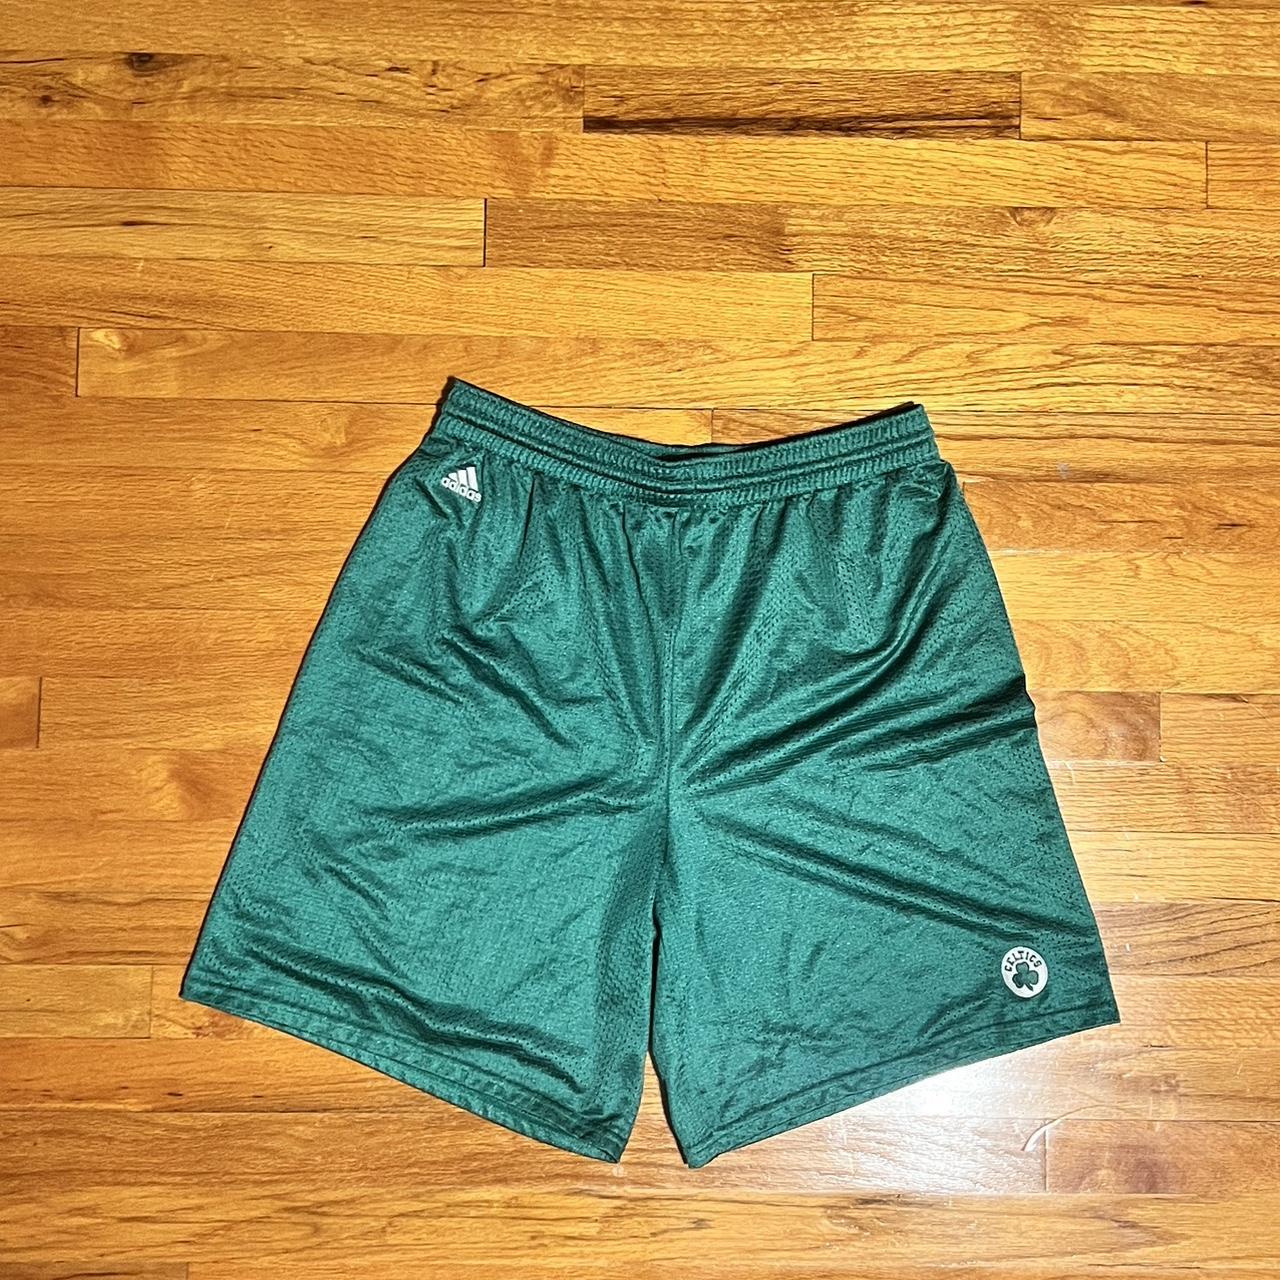 Adidas Men's White and Green Shorts | Depop